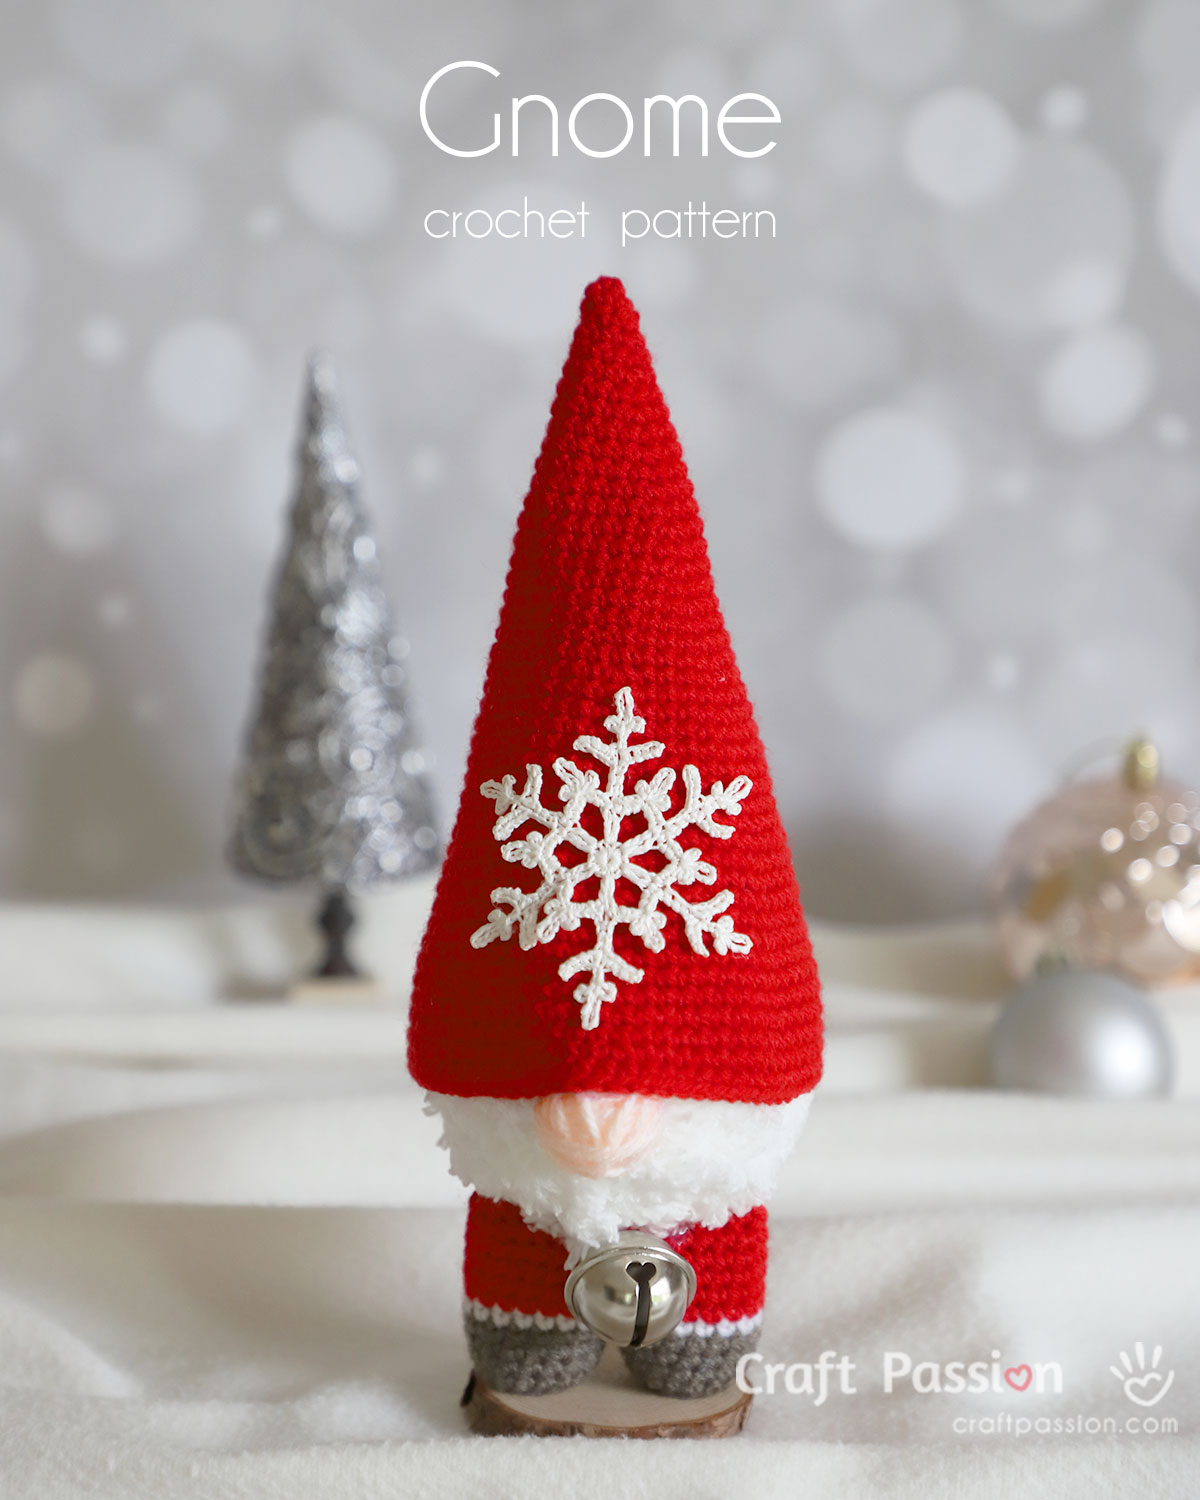 Free pattern of an Amigurumi Crochet Gnome Pattern with a snowflake on the hat. It's beautiful & perfect for your home decor during the holiday season.